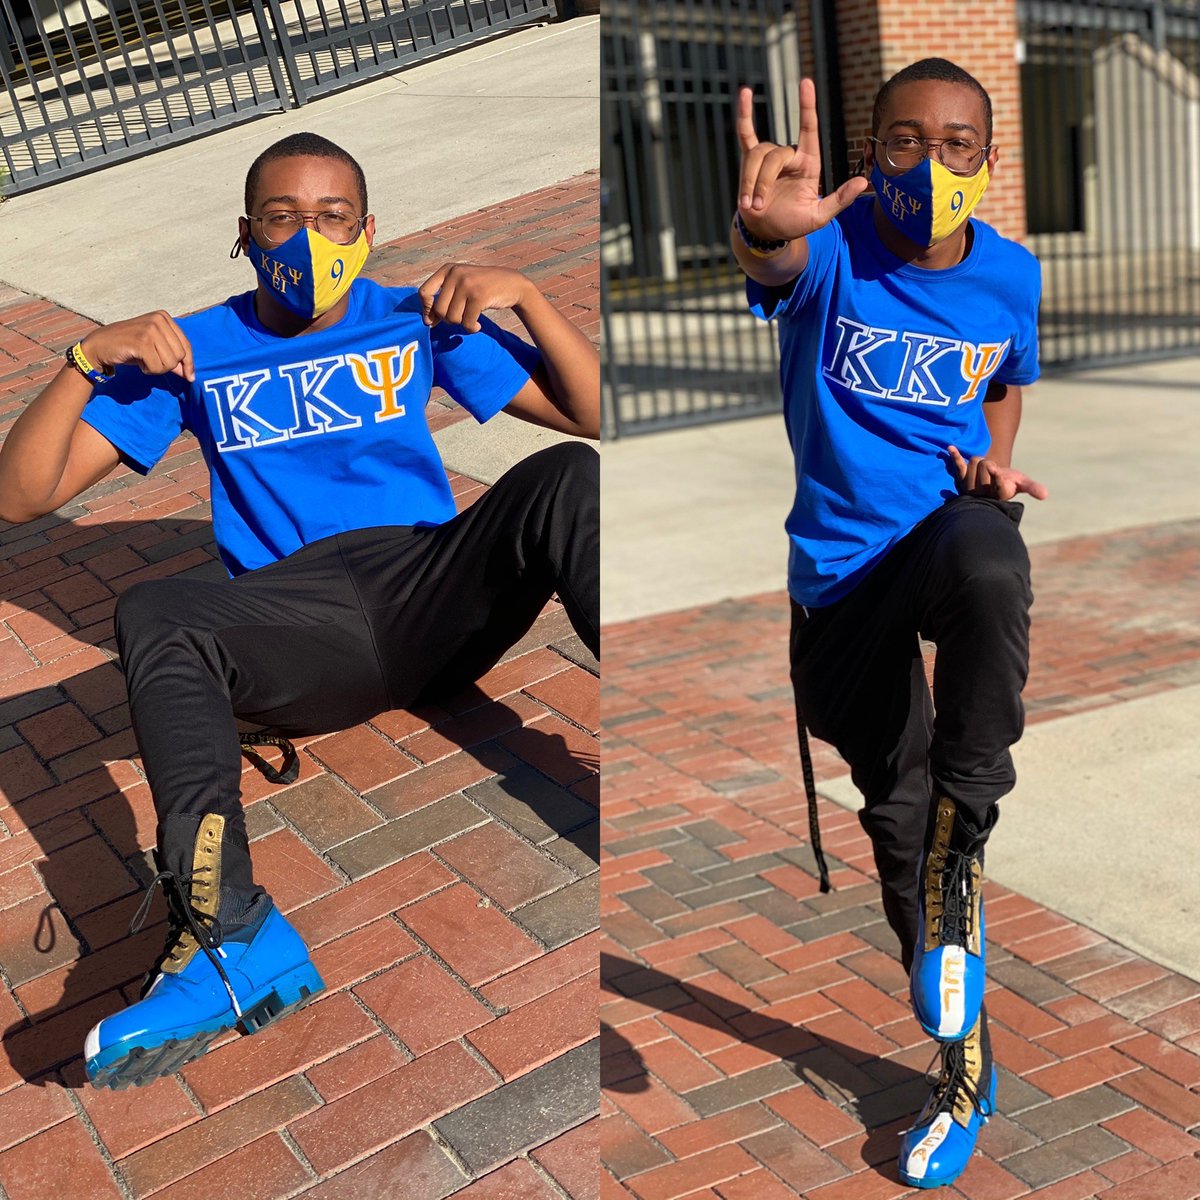 I am the 9️⃣ of this here line!!! My name is Ψ DuKK and it’s a honor to serve! 

#AEA #Kkpsi #mlitb #1919